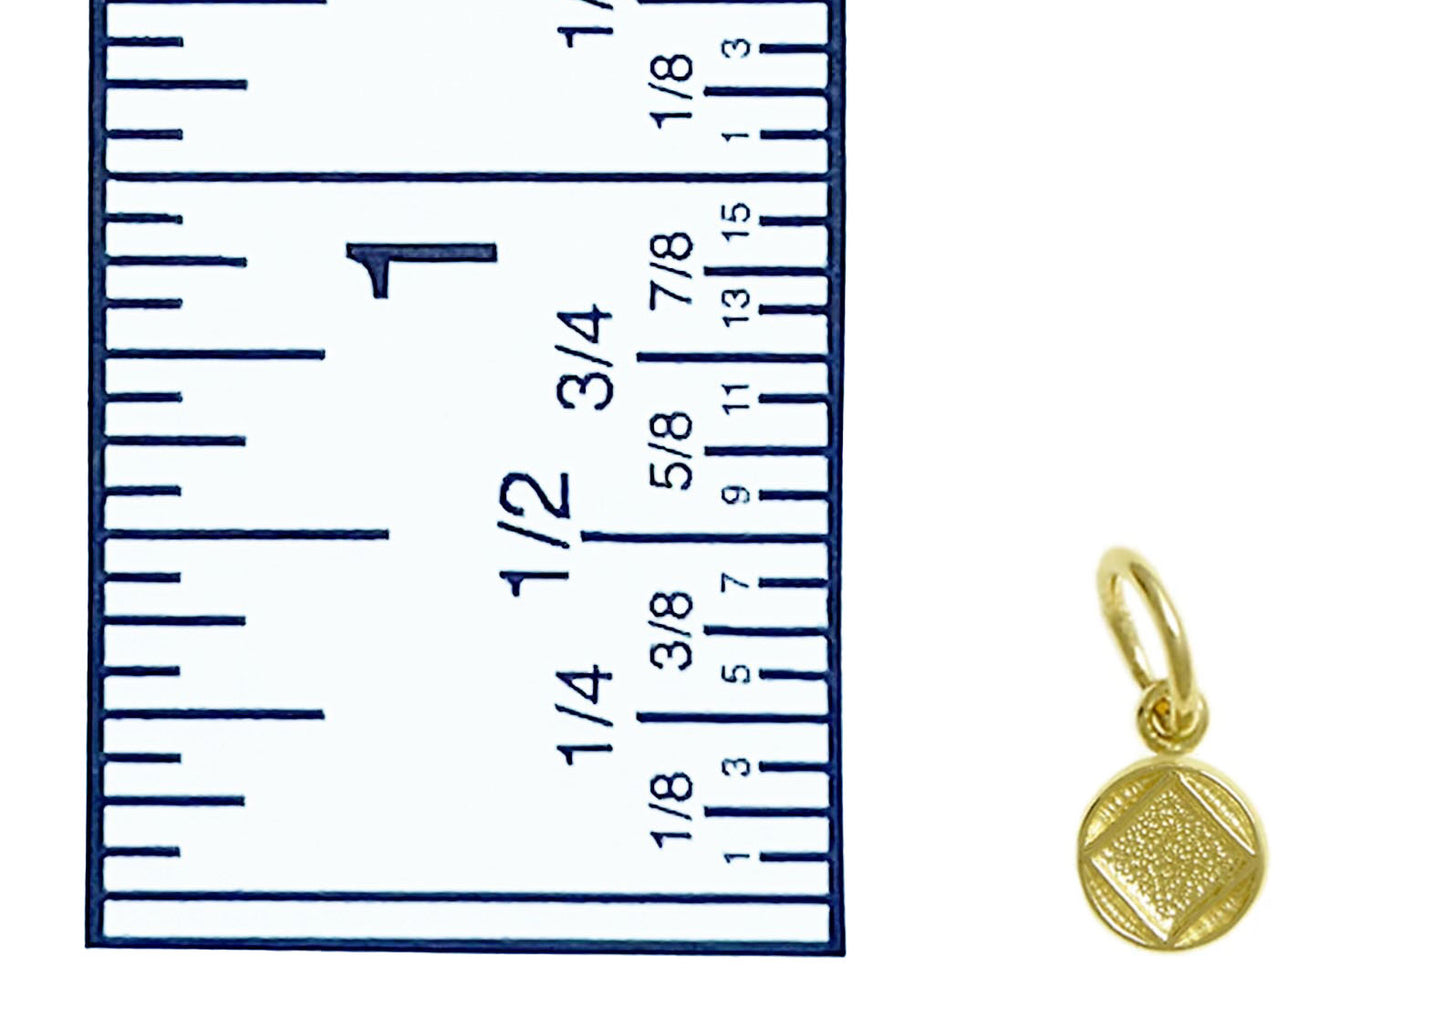 14K Gold Pendant, Narcotics Anonymous Coin Style Symbol, Very Small Size